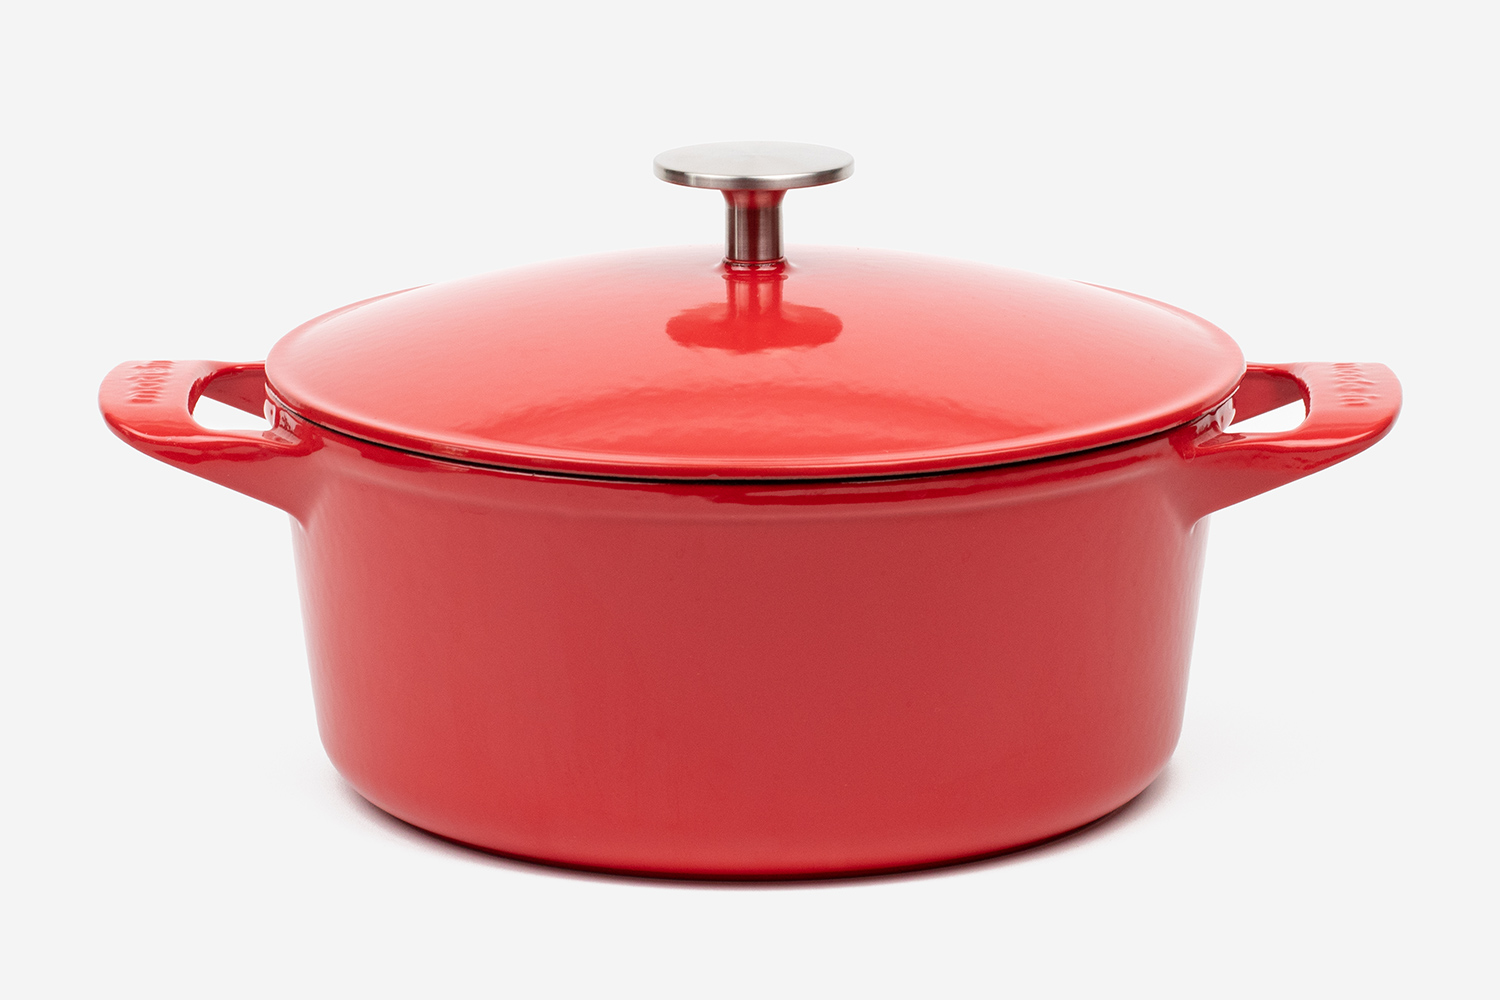 Is Le Creuset Worth the High Price? (In-Depth Review) - Prudent